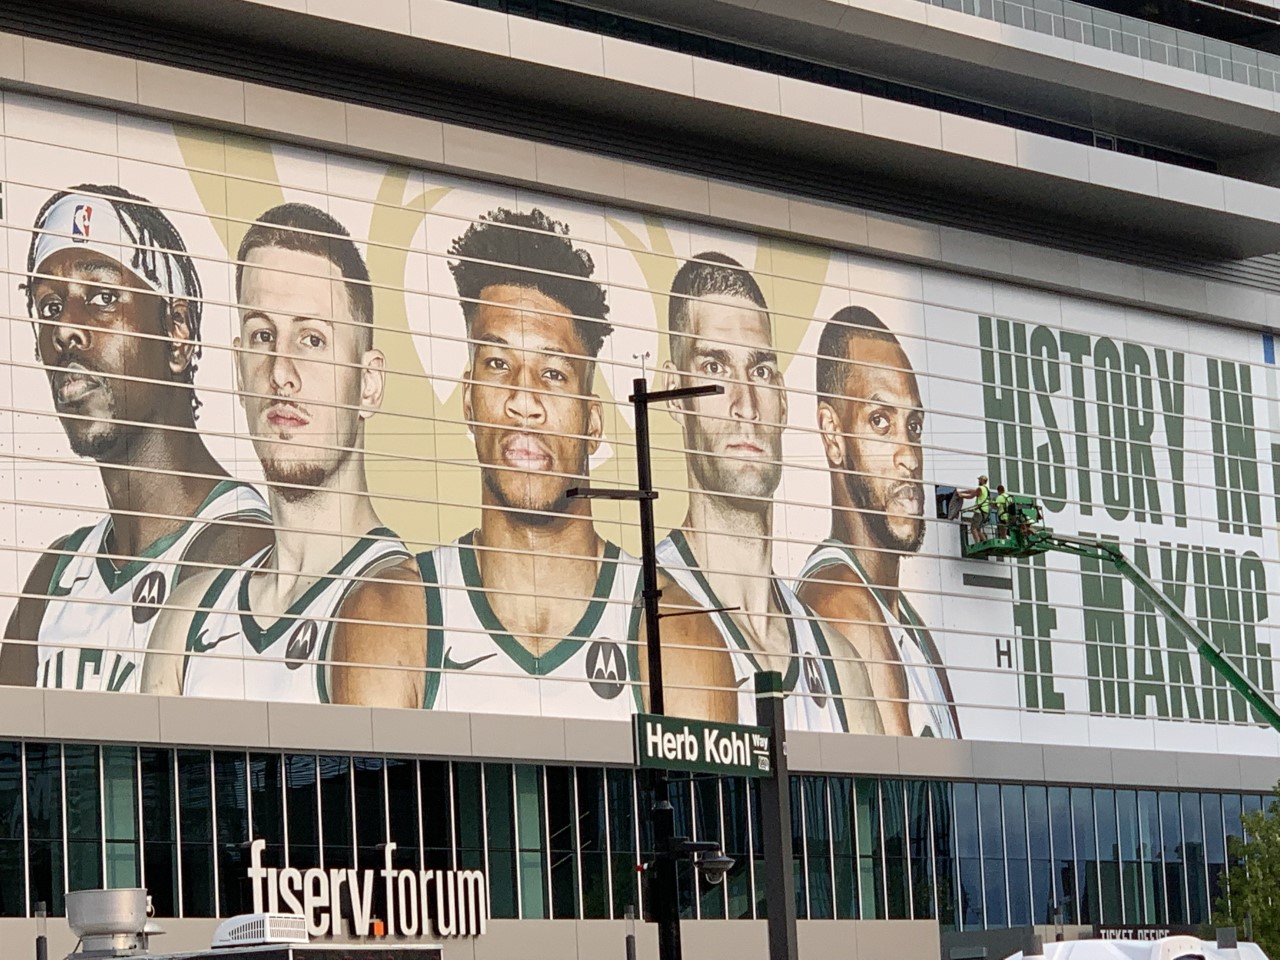 A work crew at the Fiserv Forum updating the "History in the Making Sign" the morning after the Milwaukee Bucks won the 2021 National Basketball Association championship for the first time in 50 years.